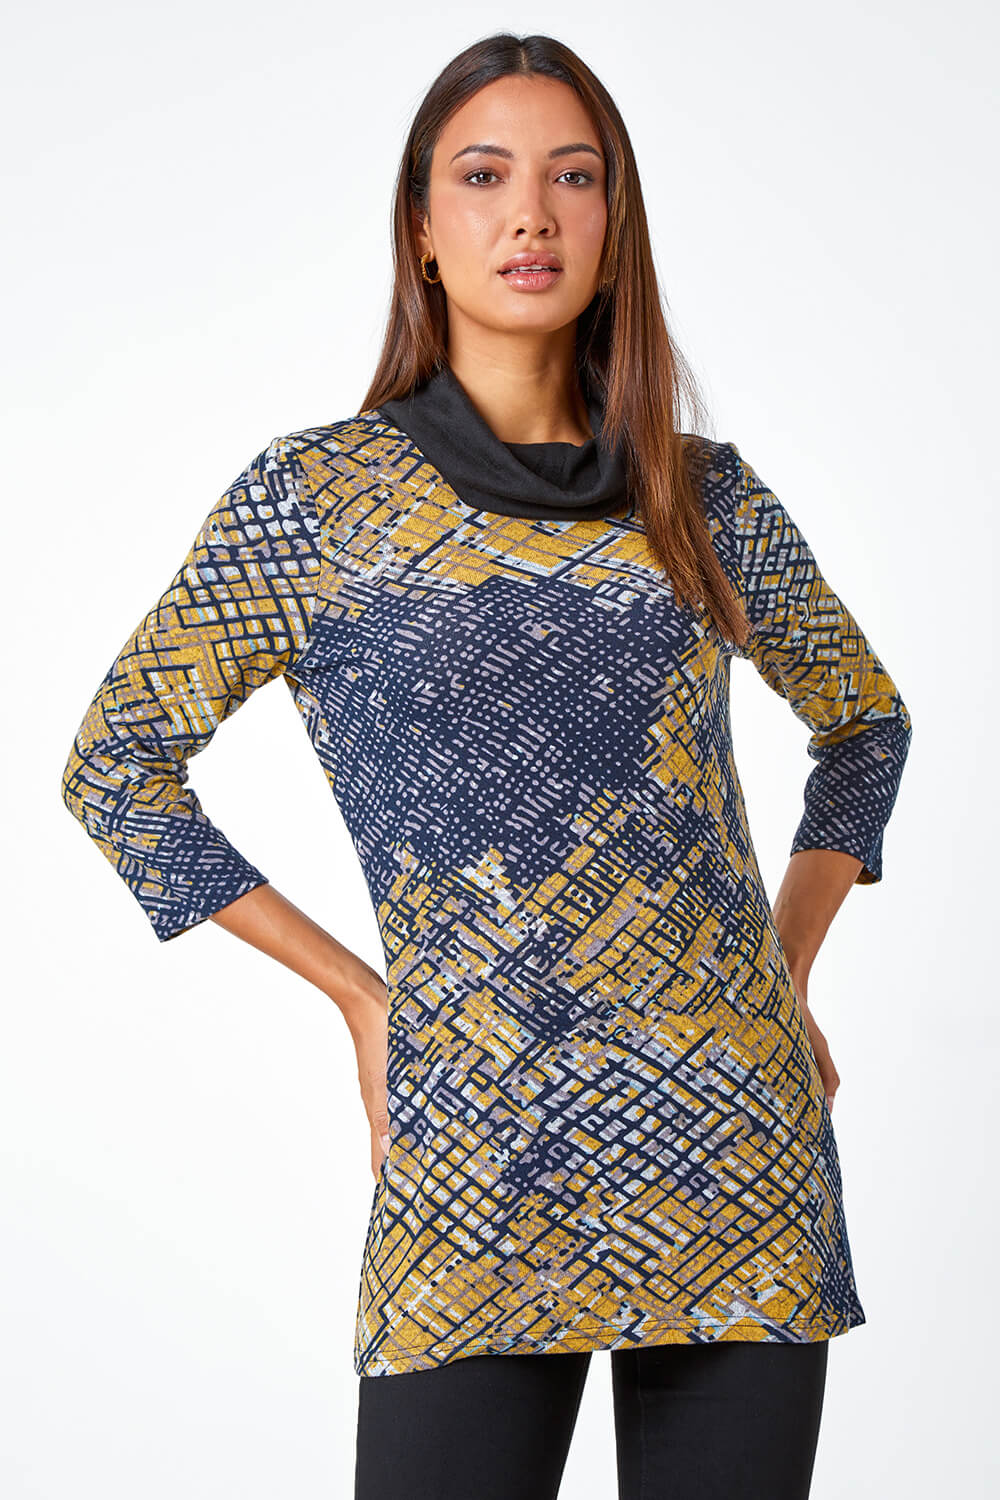 Ochre Abstract Print Cowl Neck Stretch Top, Image 2 of 5